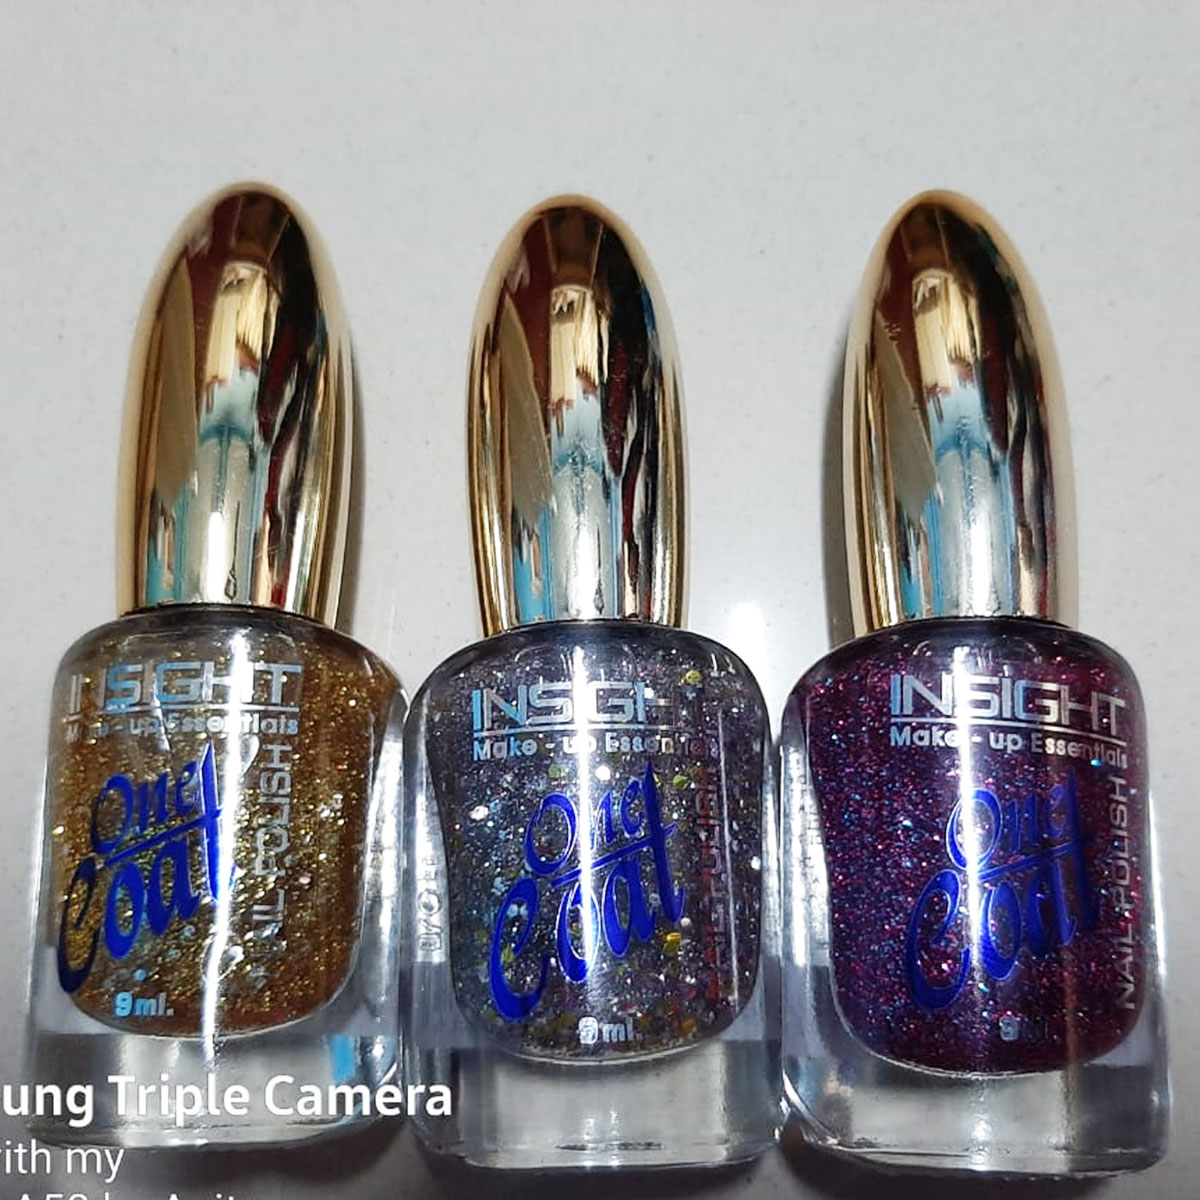 How to Put Glitter on Gel Nails: 3 Simple Steps